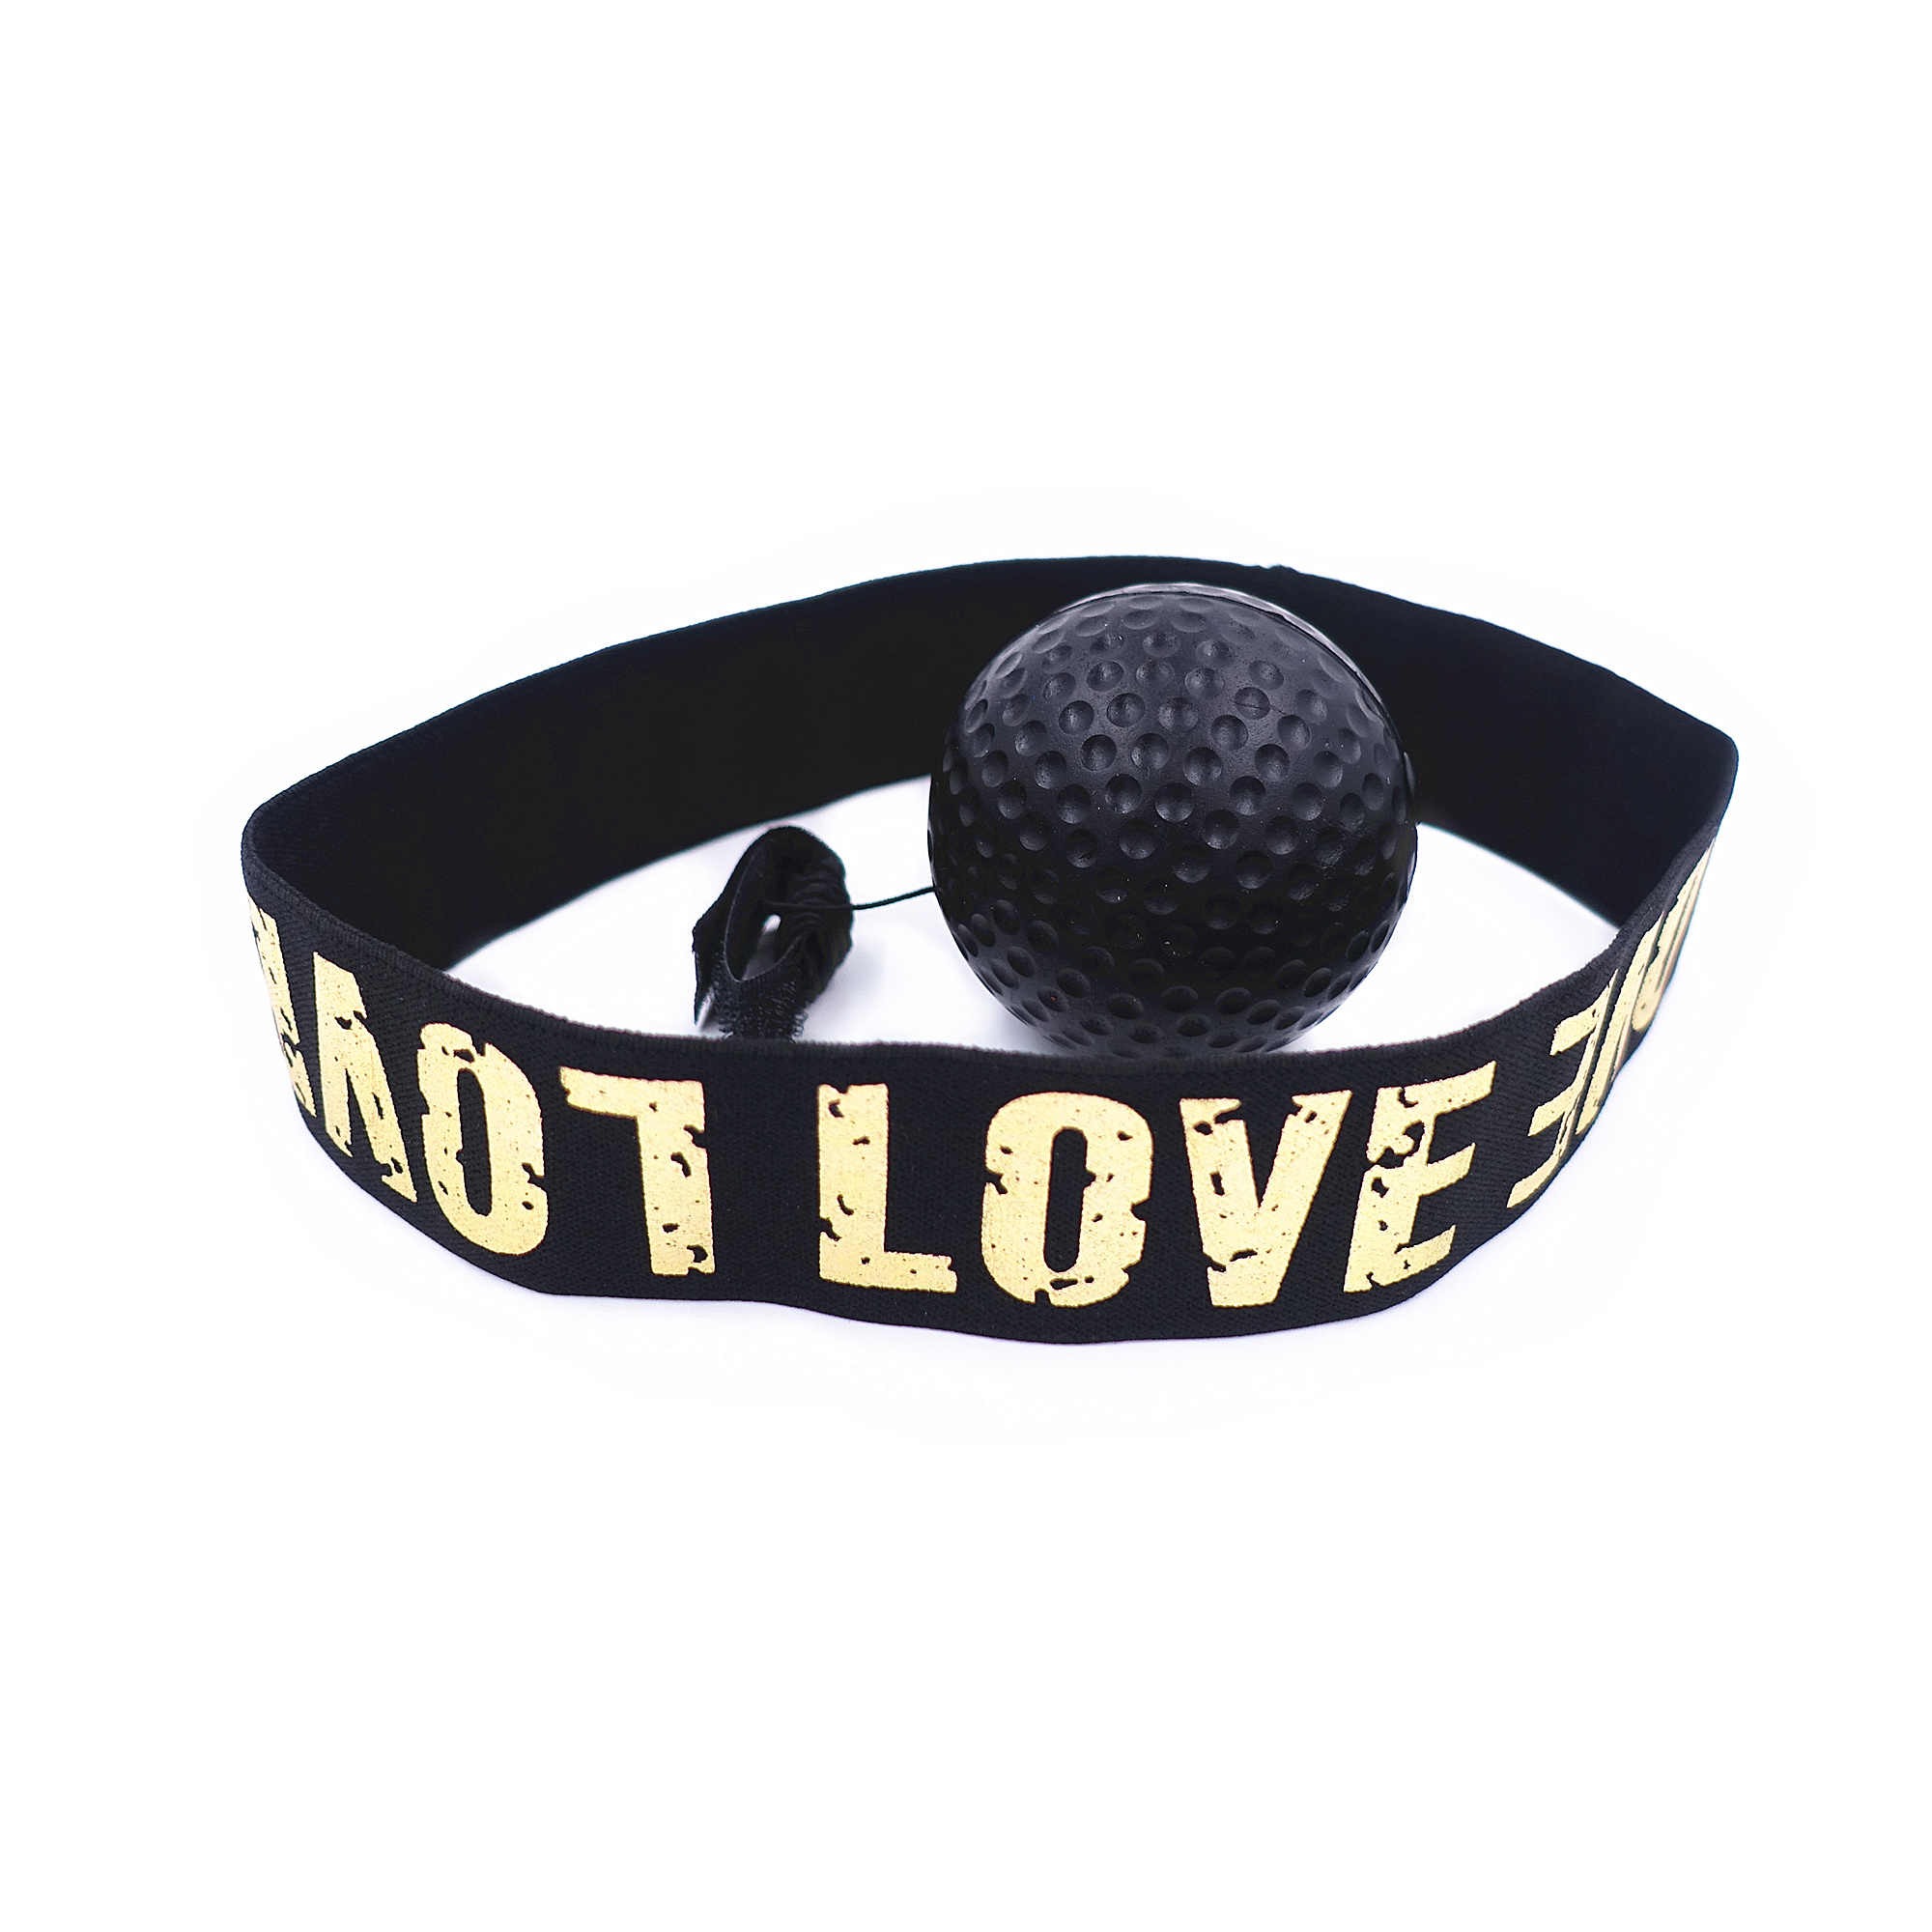 (Last Day Promotion - 50% OFF) Boxing Reflex Ball Headband, Buy 3 Get 2 Free & FREE SHIPPING